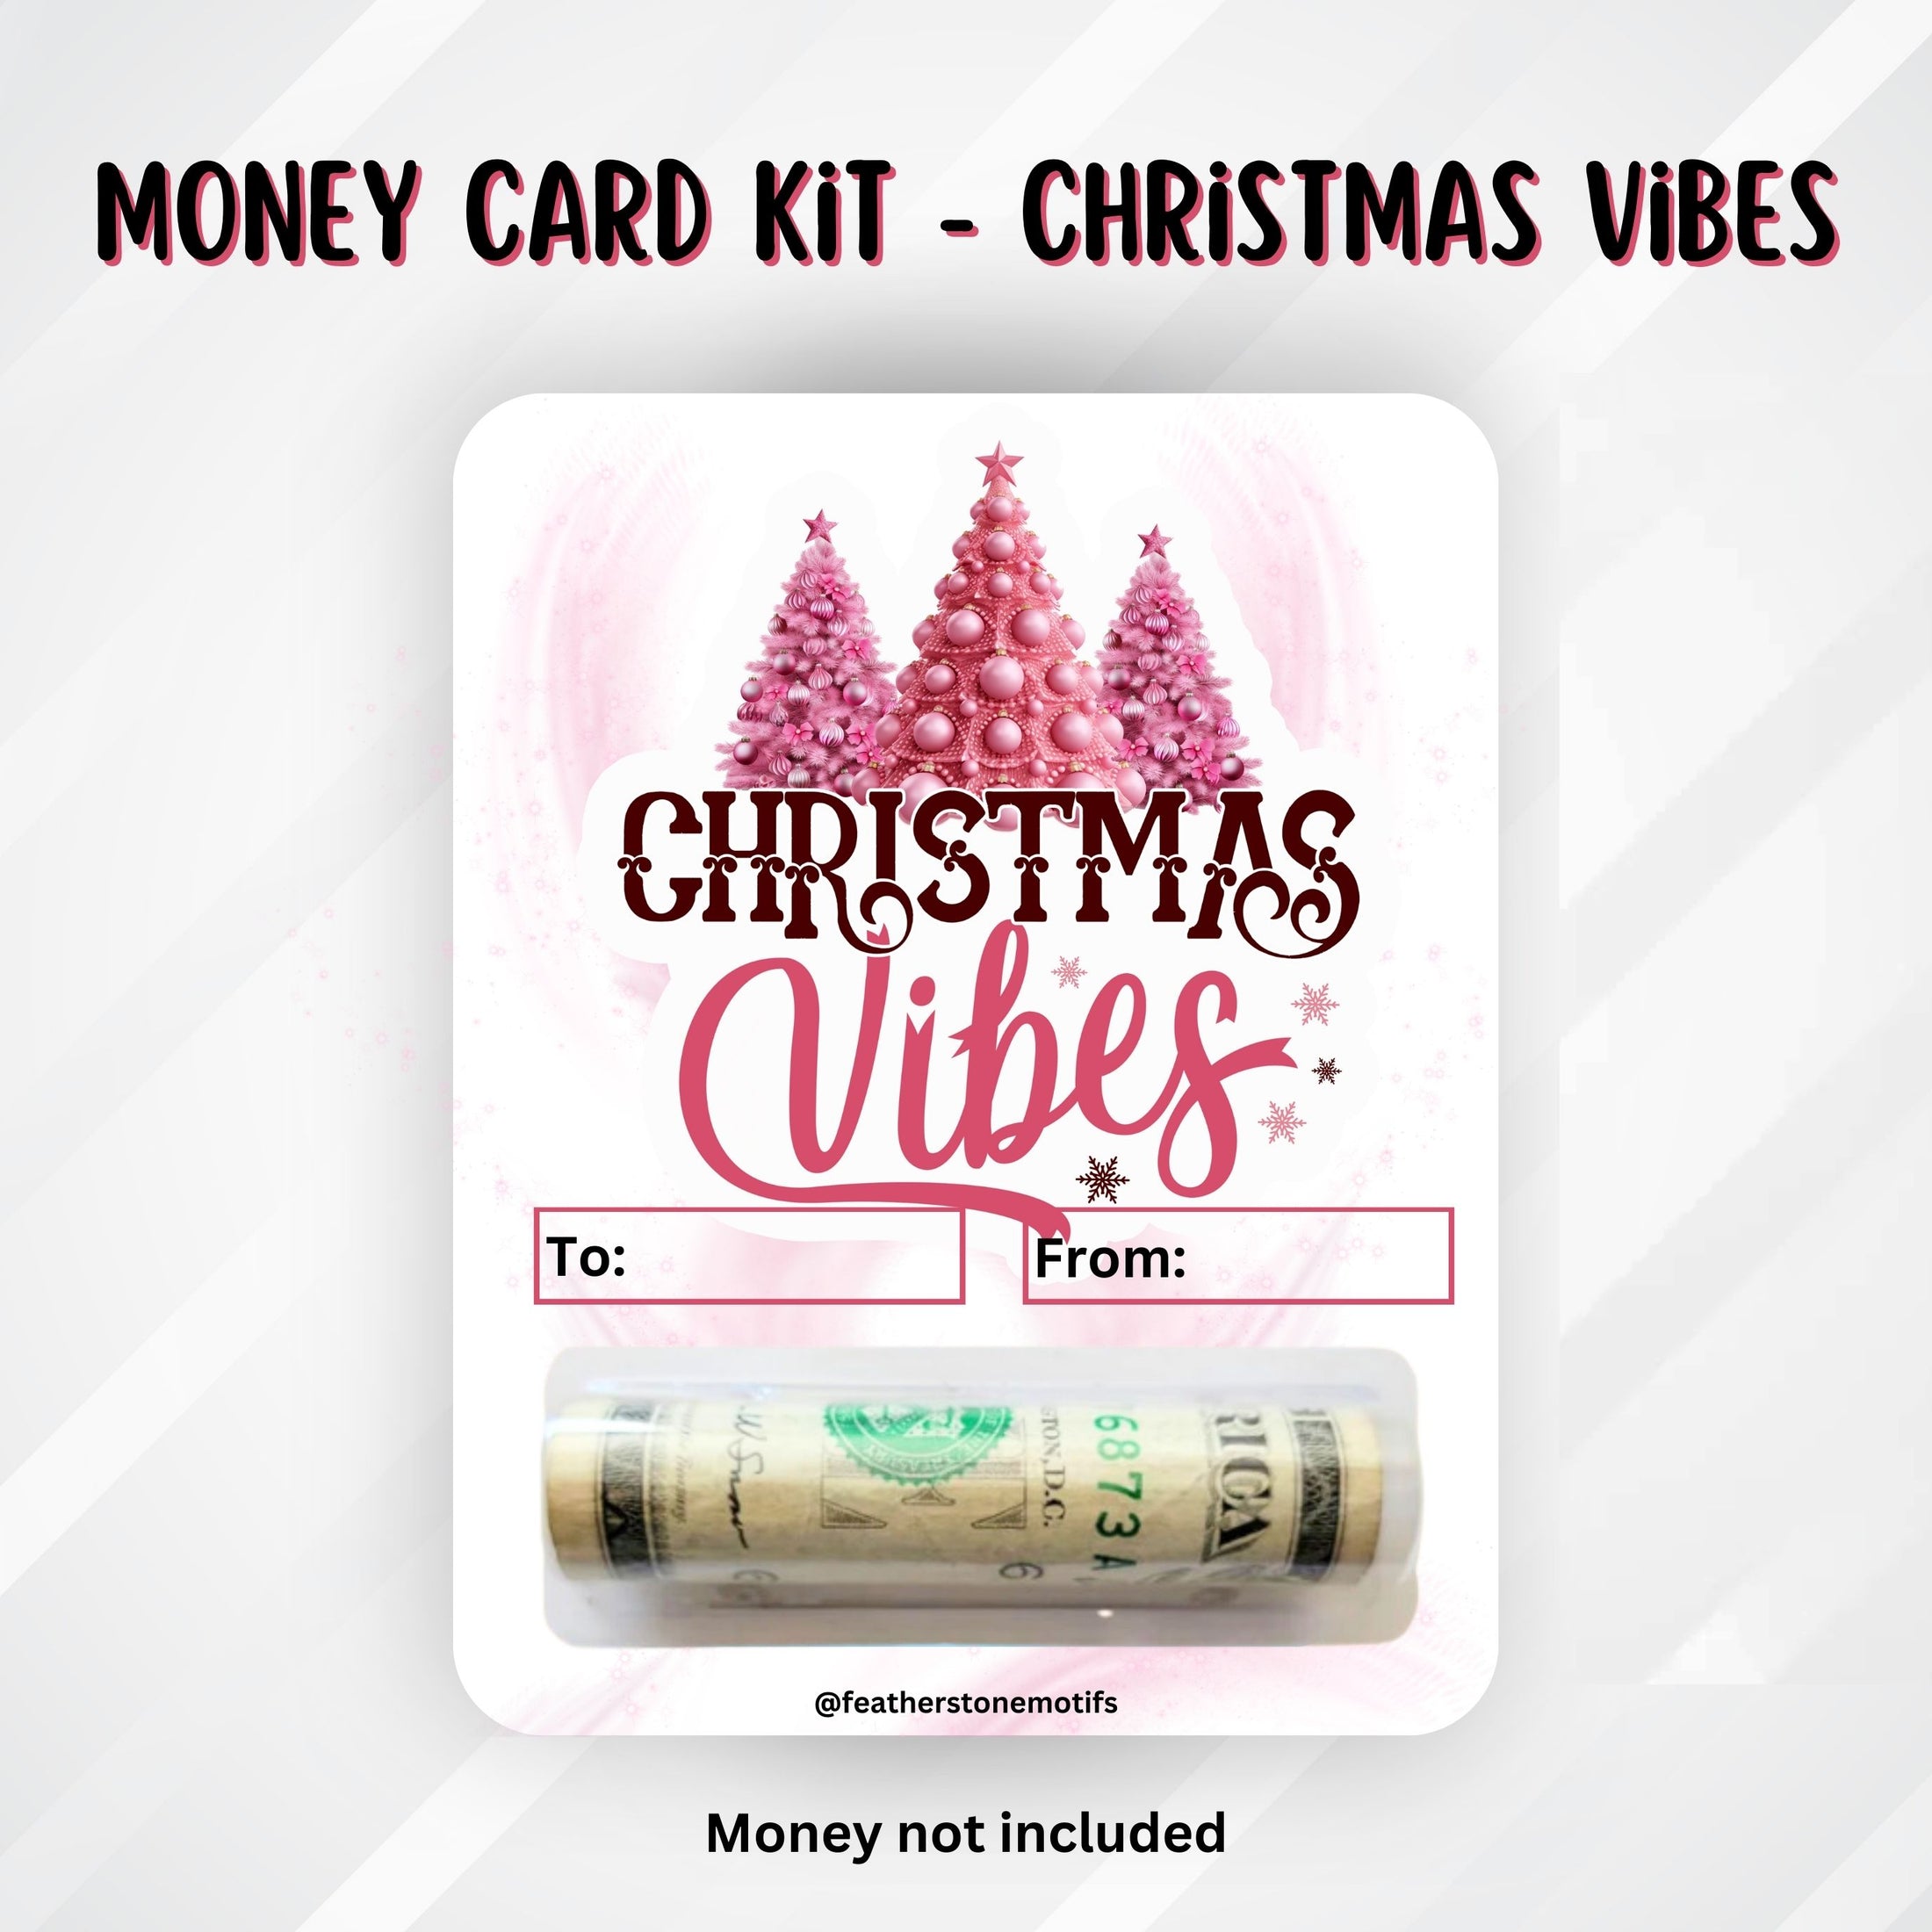 This image shows the Christmas Vibes money card with money tube attached.